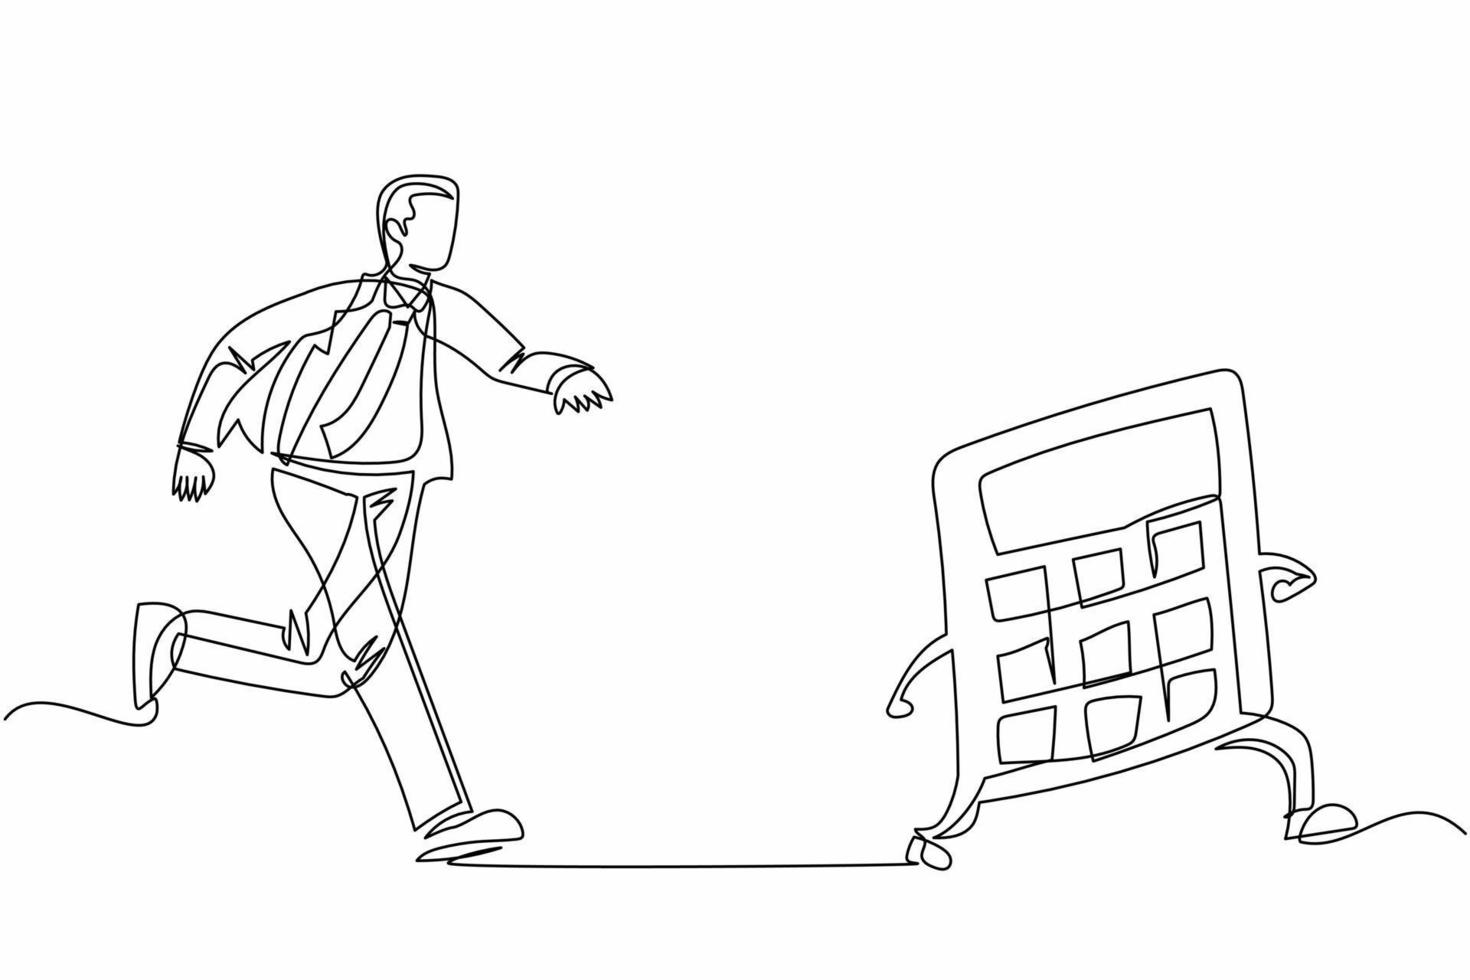 Continuous one line drawing businessman chasing calculator. Math operations, budget, analytics, data, income, finance. Calculations and economy. Single line draw design vector graphic illustration